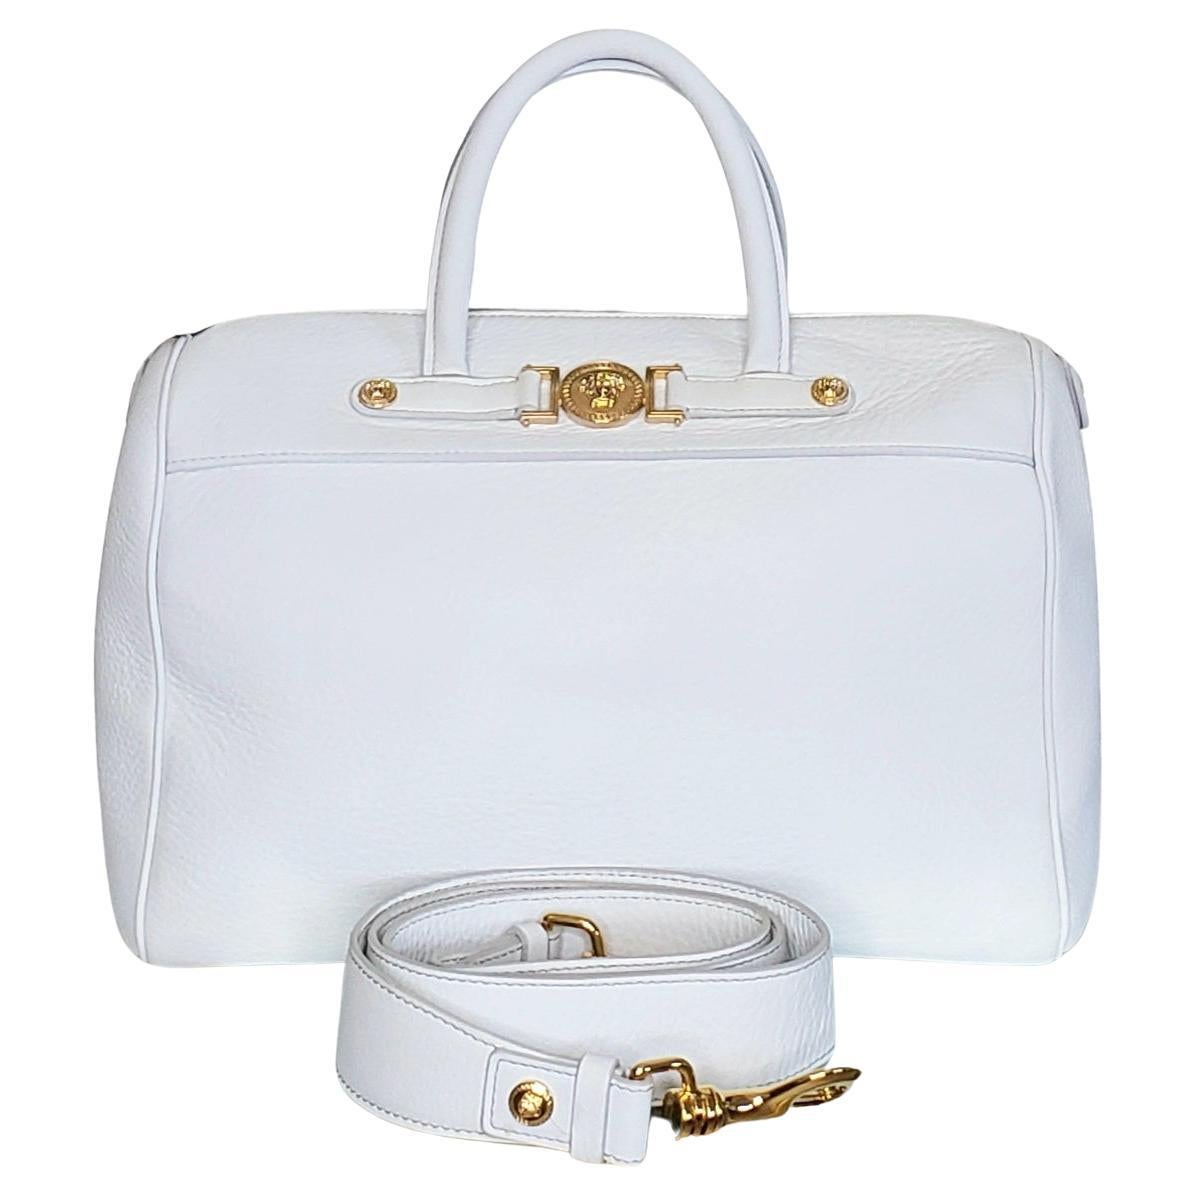 VERSACE PALAZZO WHITE LEATHER TOTE BAG w/ GOLD-TONE HARDWARE  For Sale